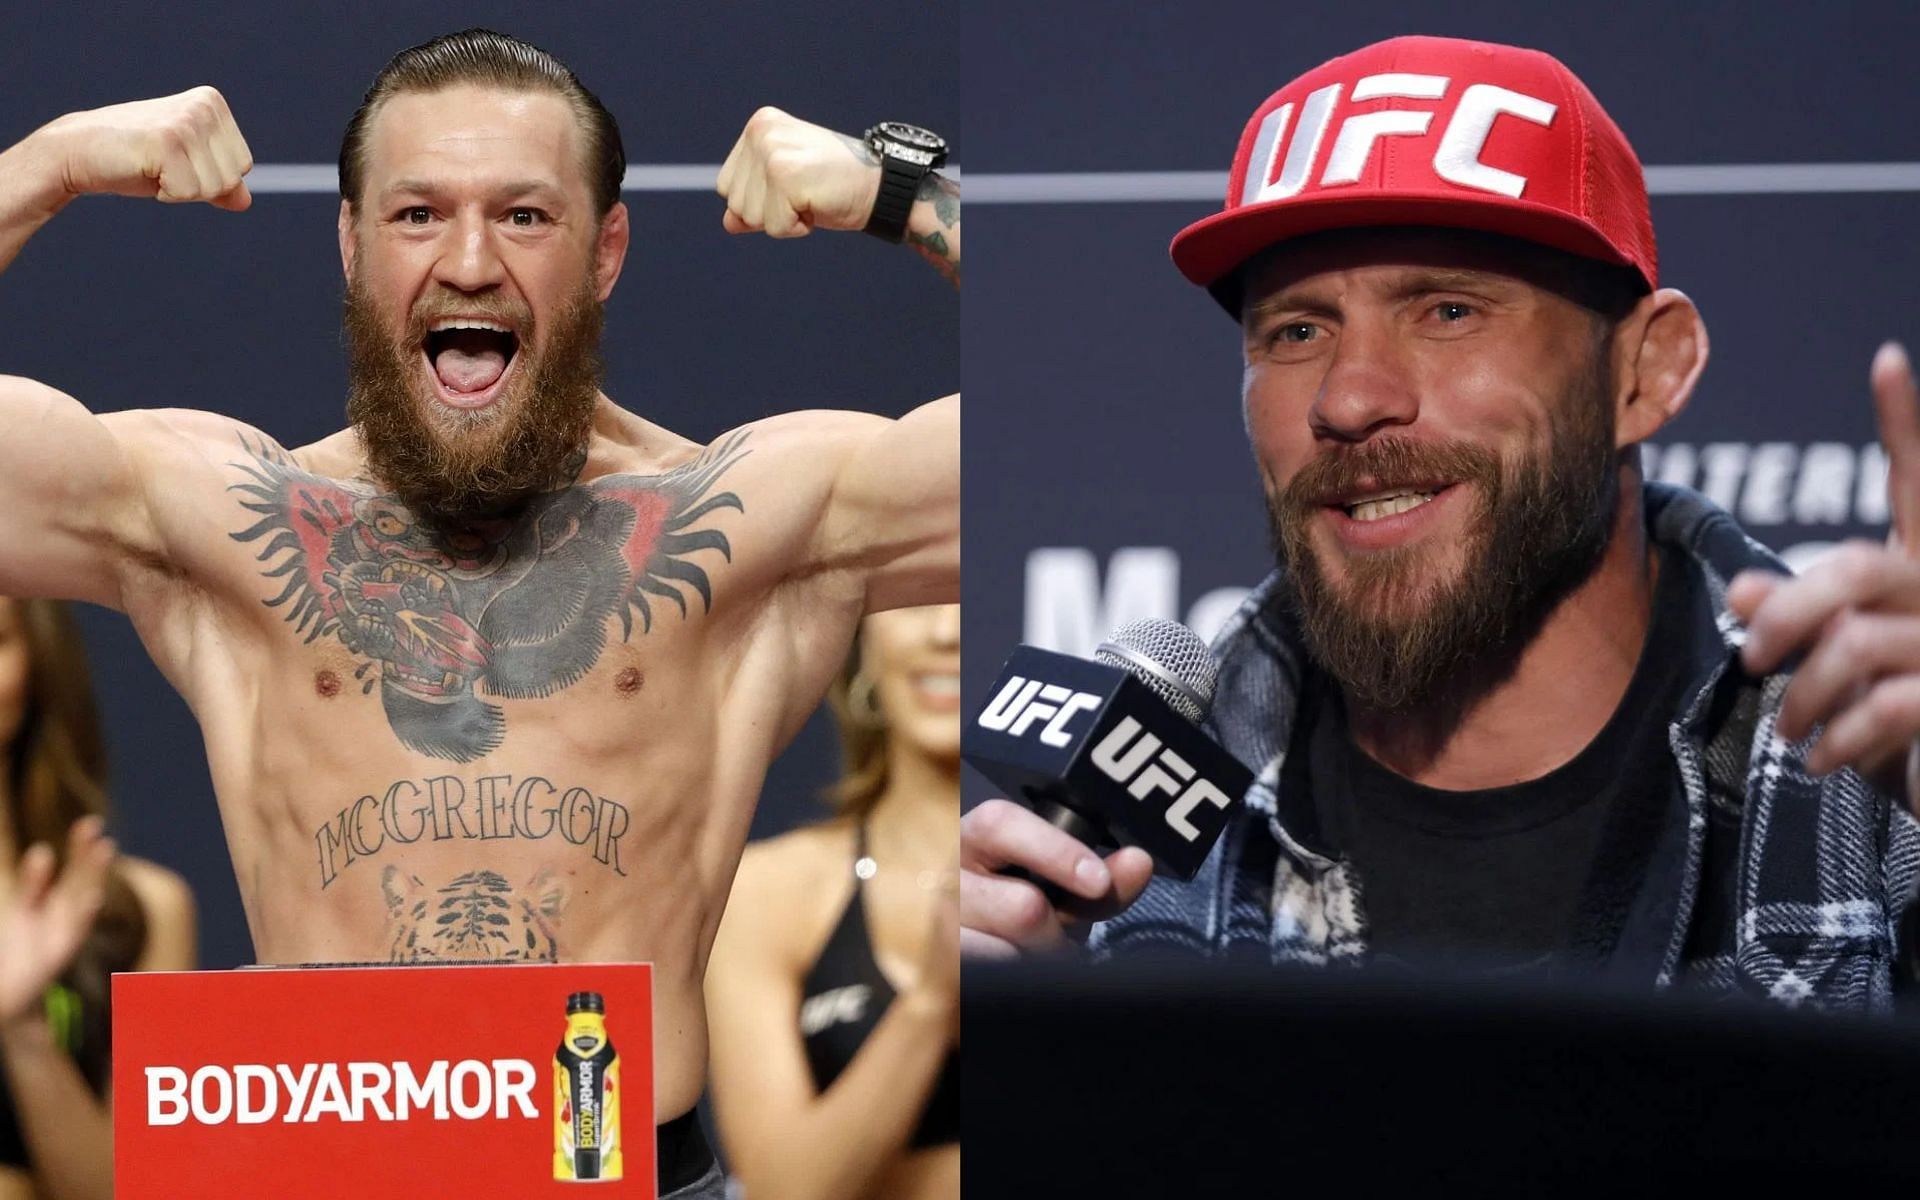 Donald Cerrone (right) says he did not receive additional pay for his UFC 249 fight with Conor McGregor (left) [Images Courtesy: @GettyImages]